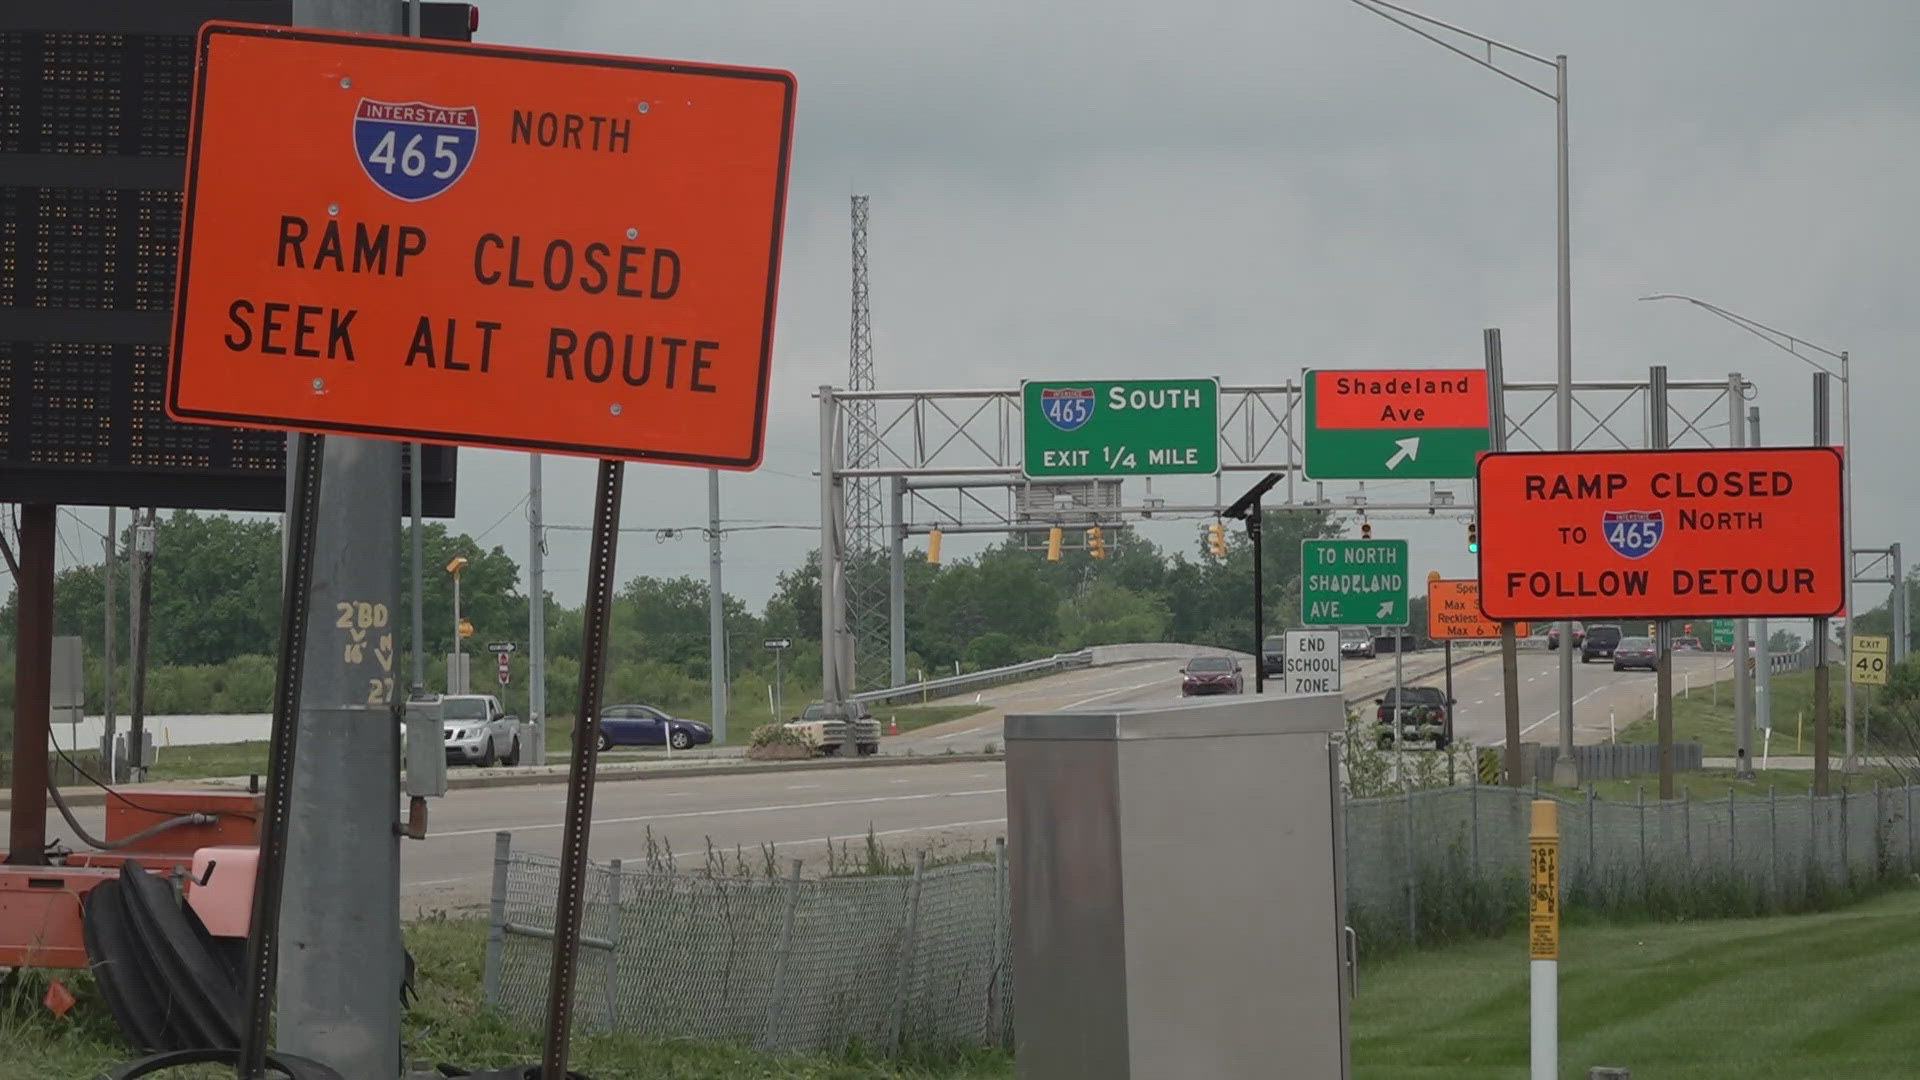 13News reporter Anna Chalker details all the planned construction set for Indianapolis-area interstates this weekend.